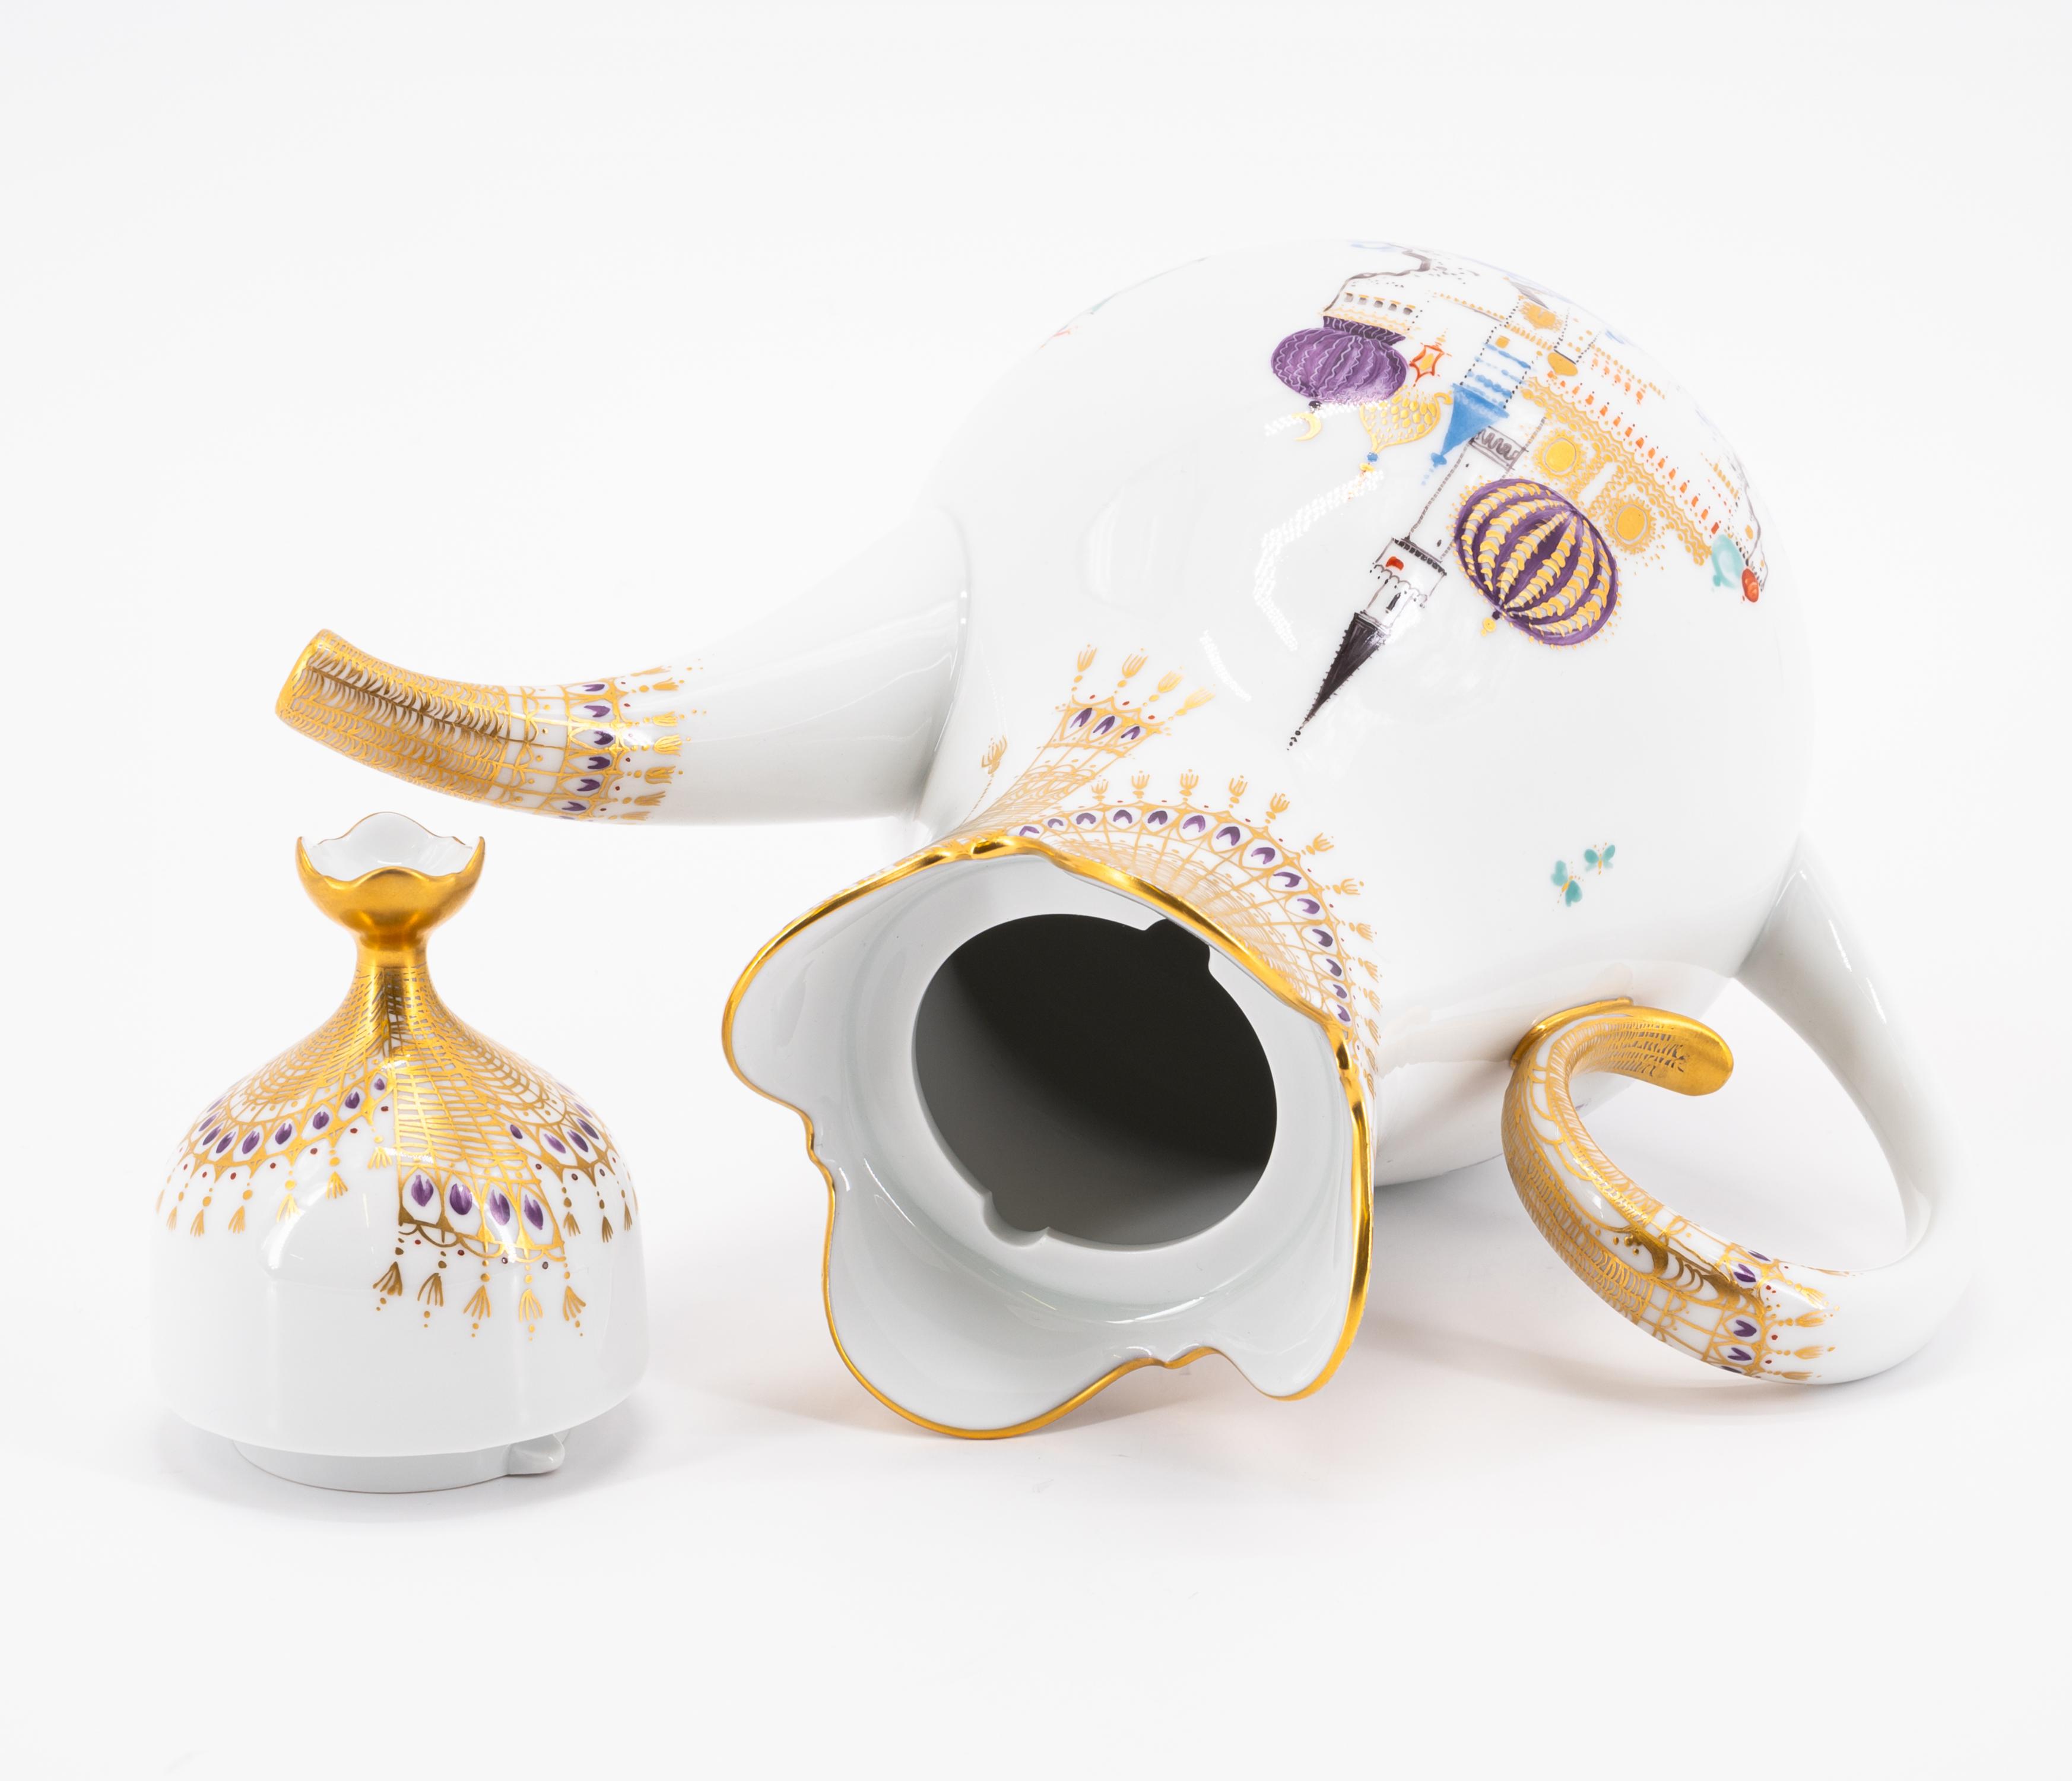 LARGE PORCELAIN COFFEE SERVICE WITH '1001 NIGHTS' DECOR FOR 12 PEOPLE - Image 5 of 19